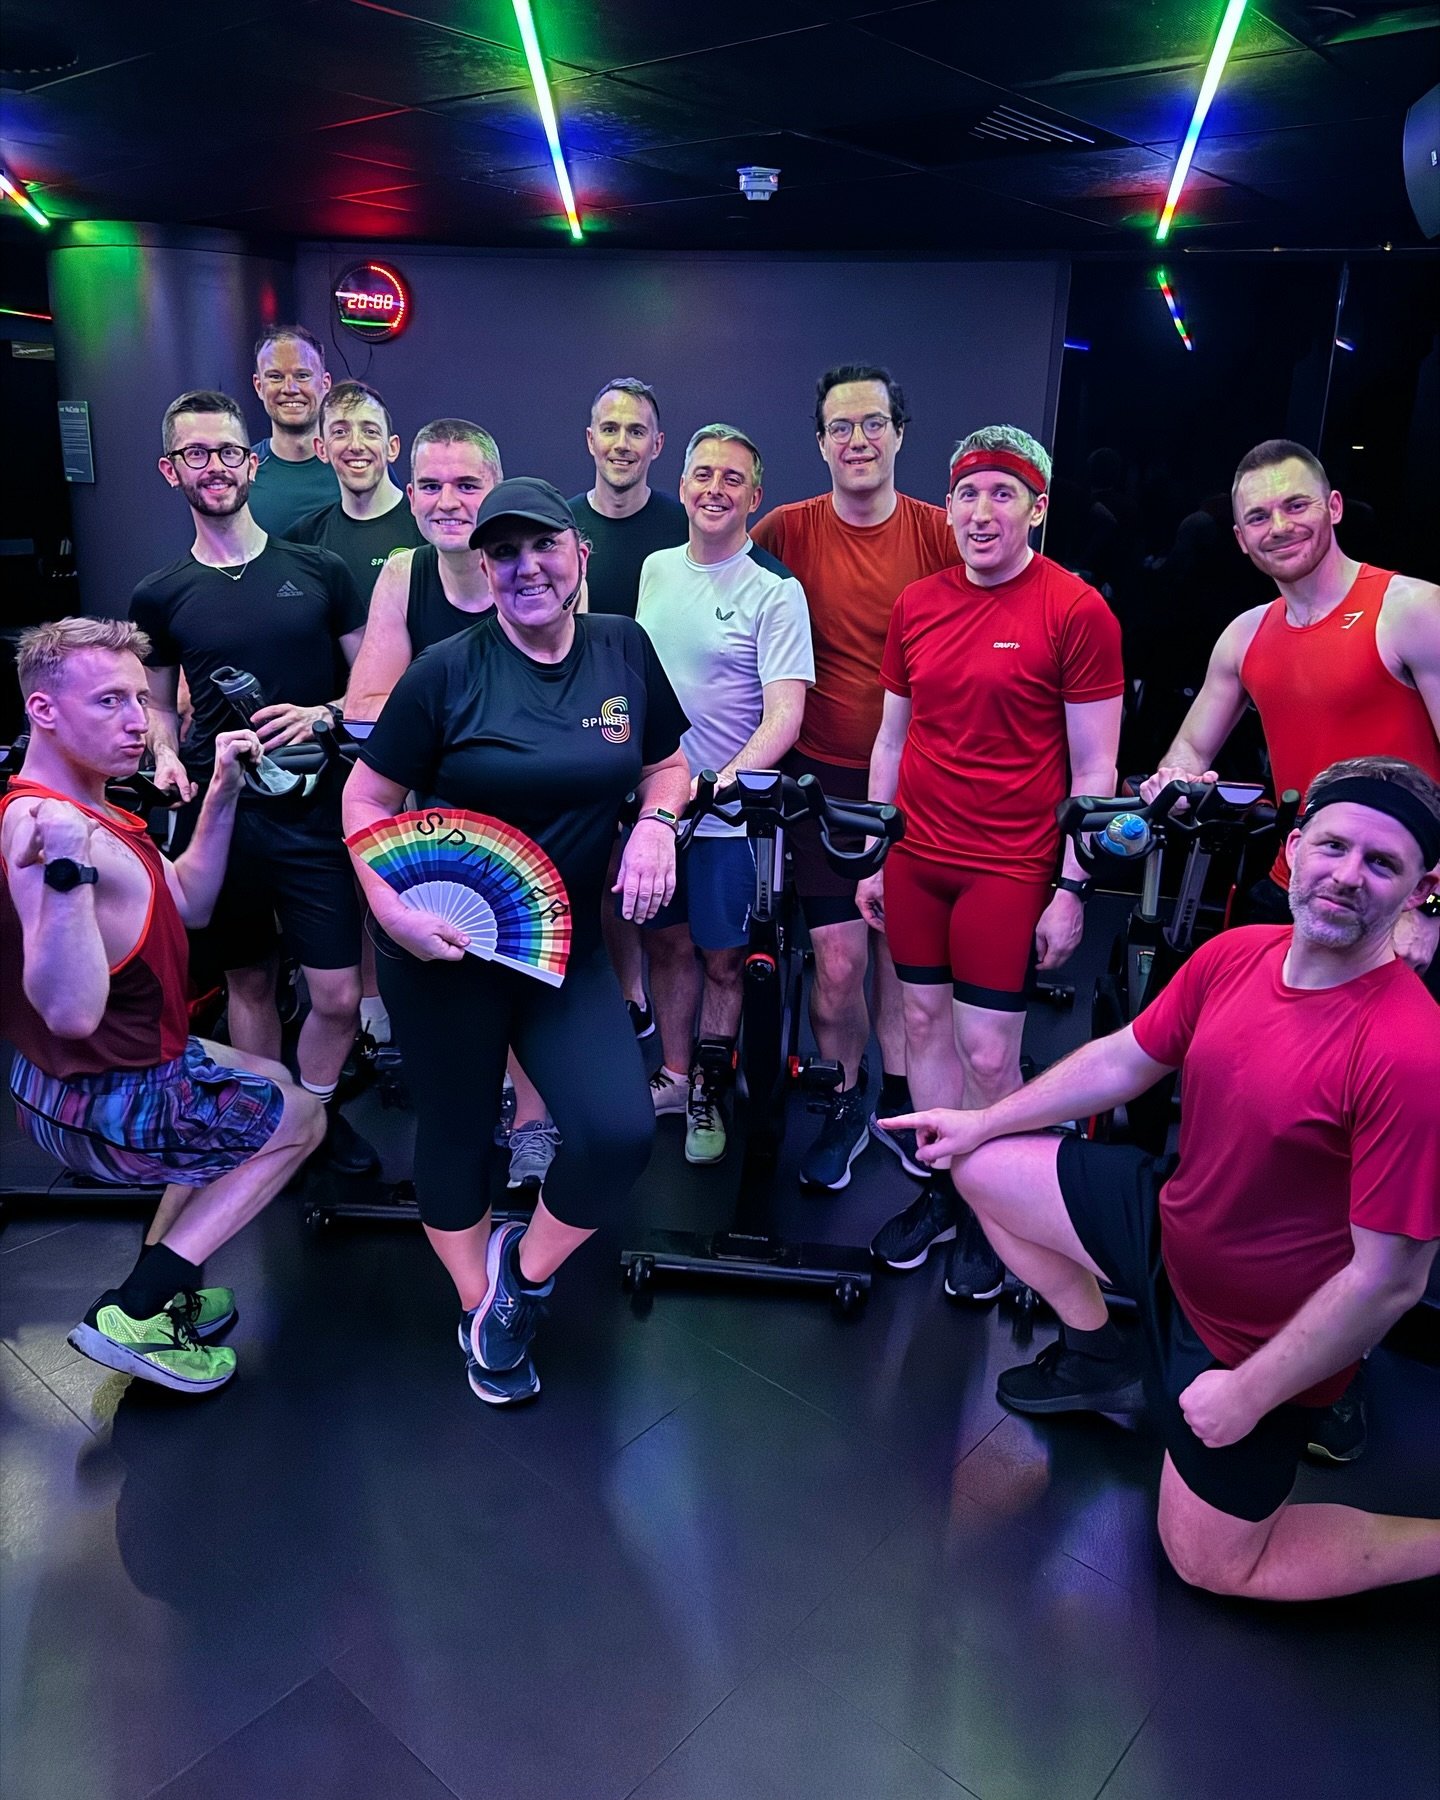 🕺 80s night at our fabulous new @nuffieldhealthcoventgarden studio with @cluffy72! 🌈🪩 May is selling FAST so grab a last ticket and join us on a bike soon! Link in bio. #lgbtfitness #gayuk #gaylondon #spinder #spinclub #spinstudio